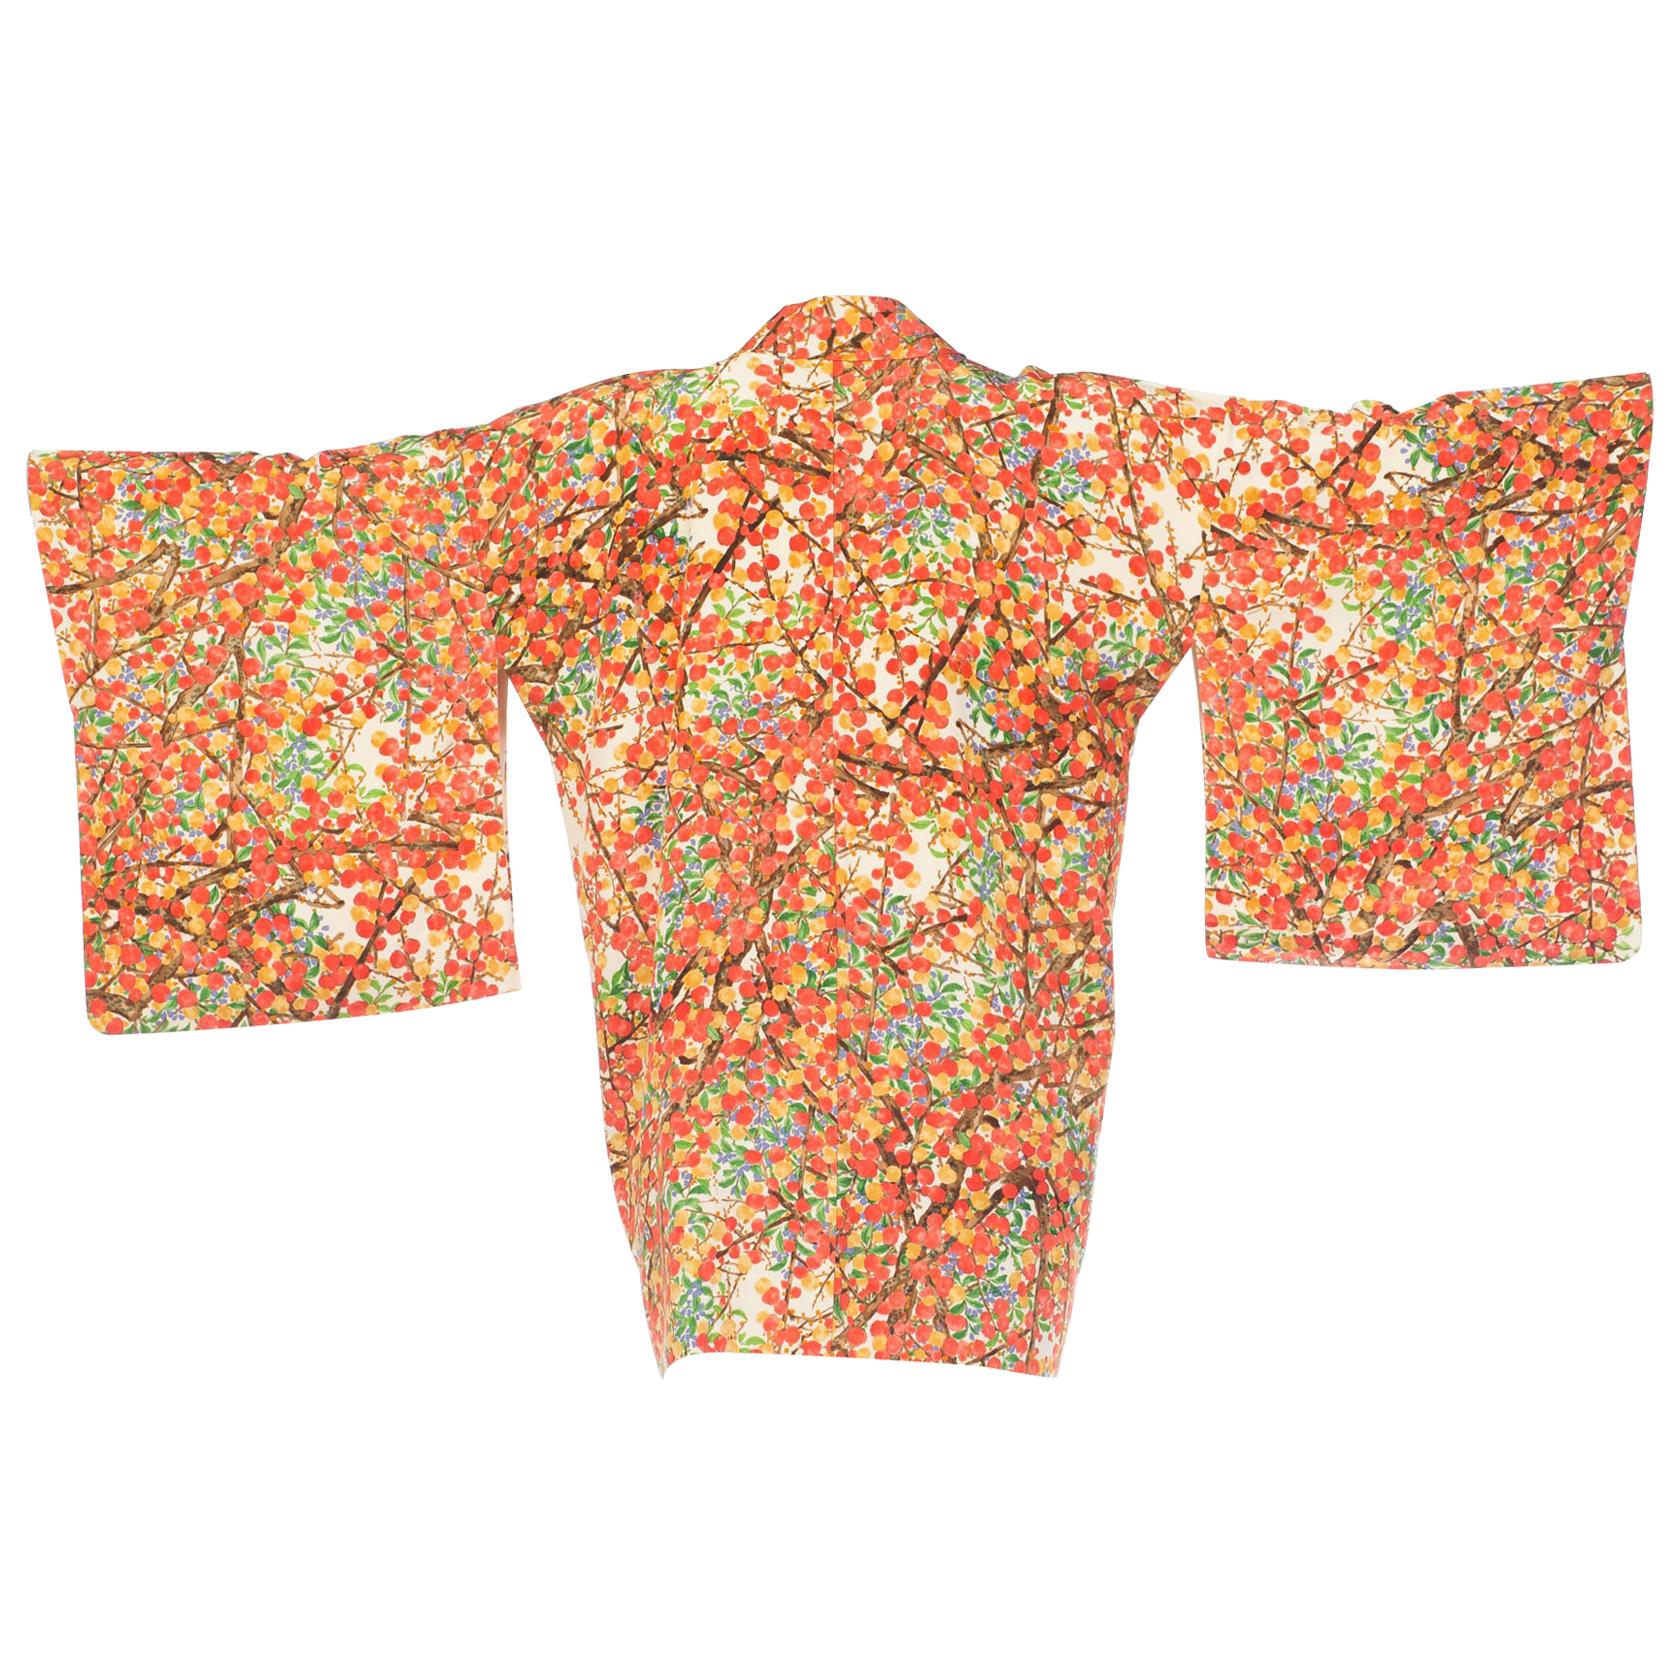 1960s Floral Japanese Kimono With Crystals Strap